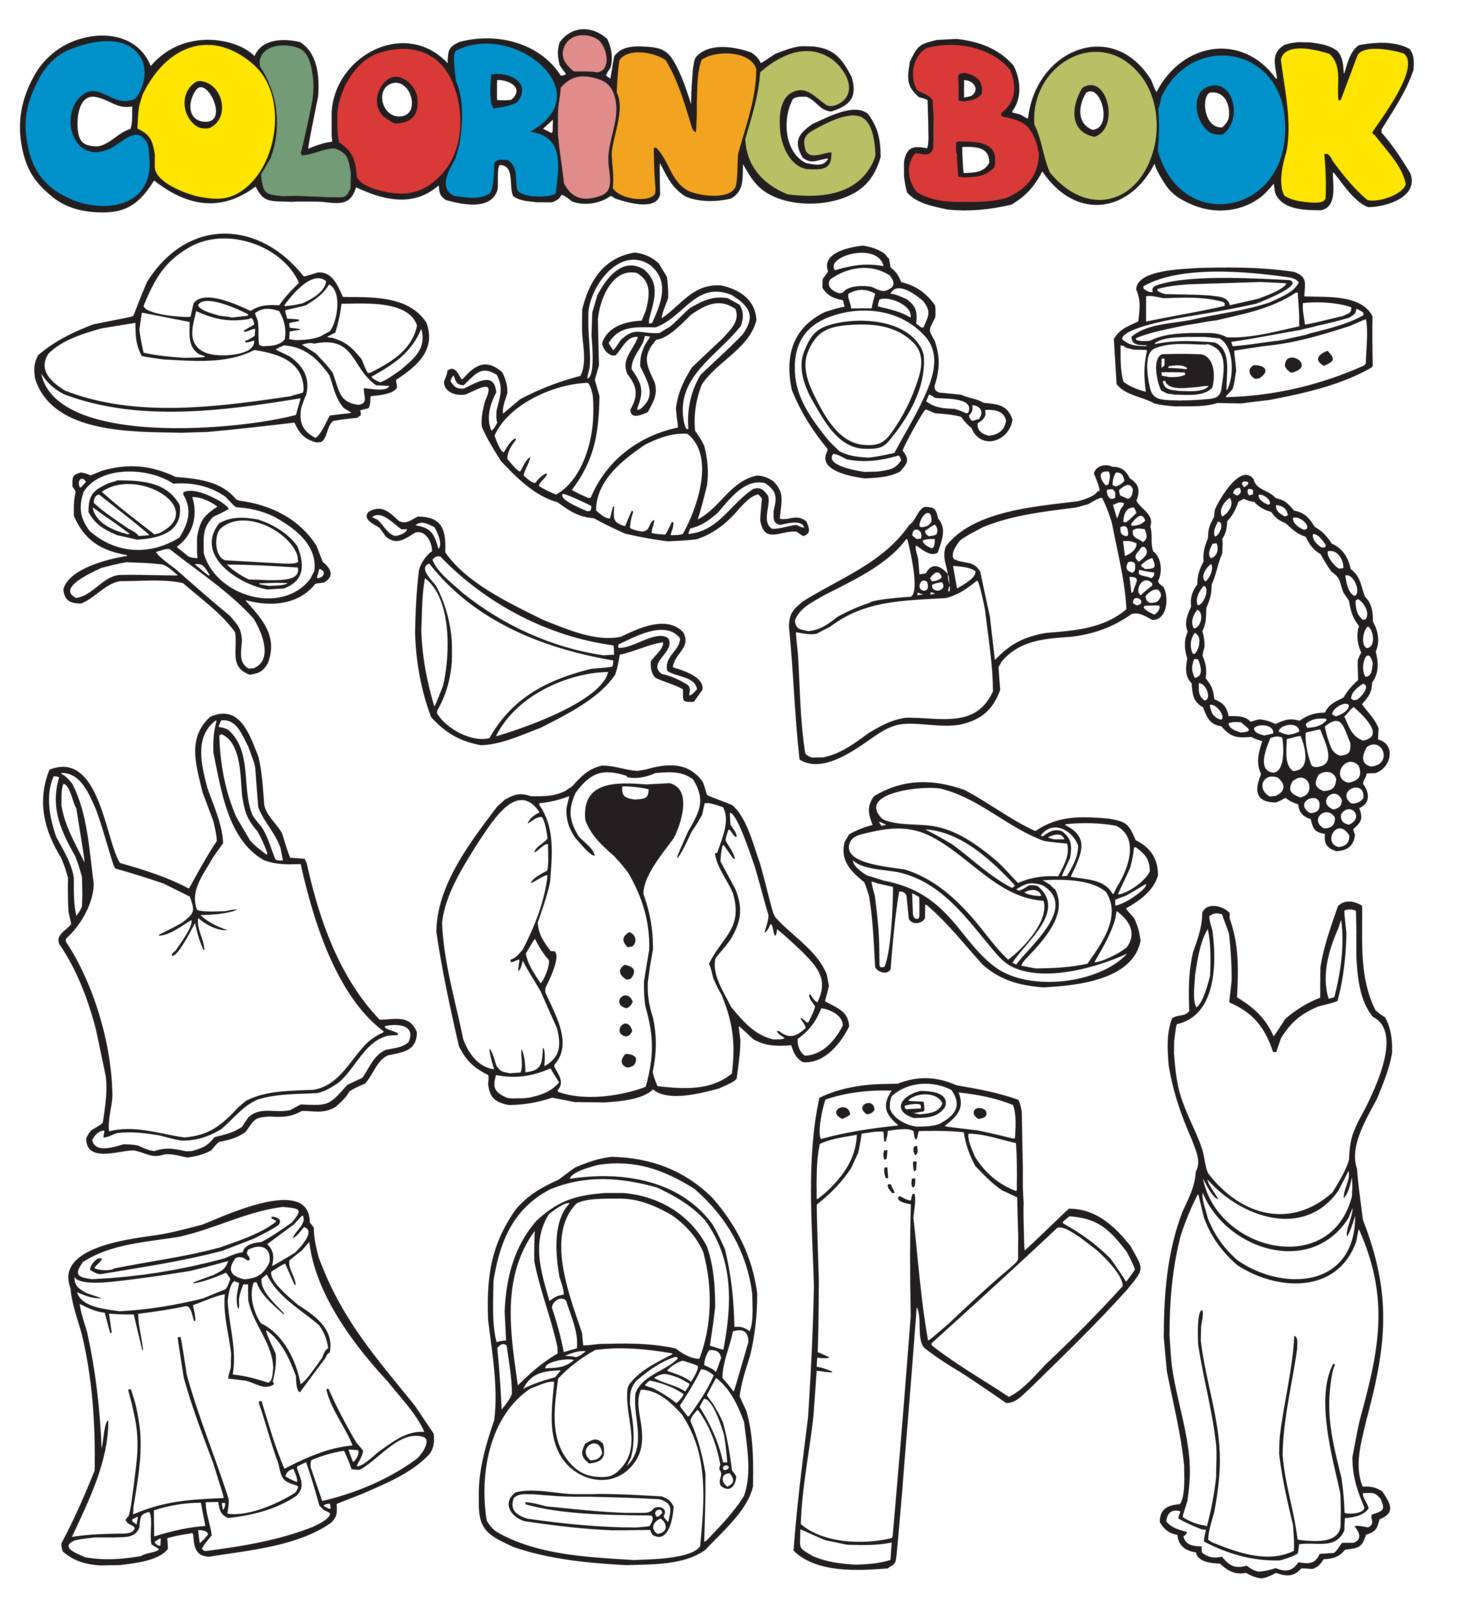 Coloring book with apparel 2 - vector illustration.